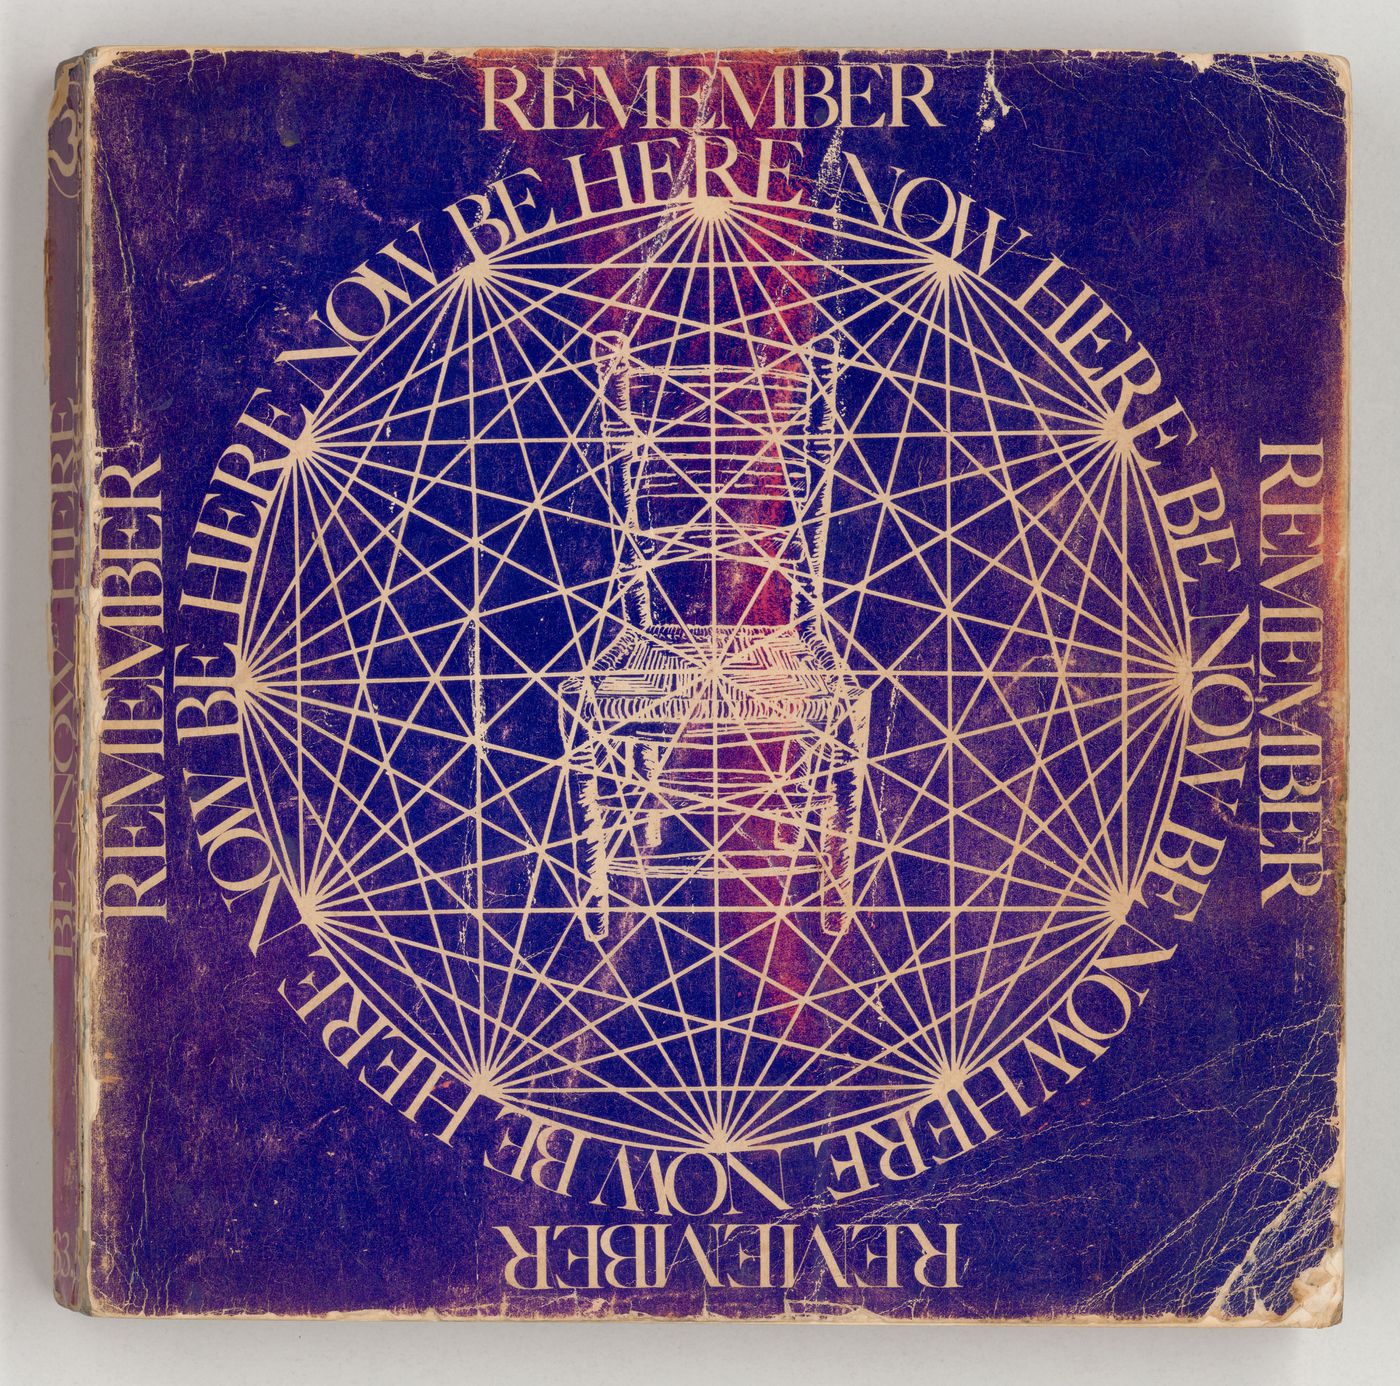 Remember: Be Here Now